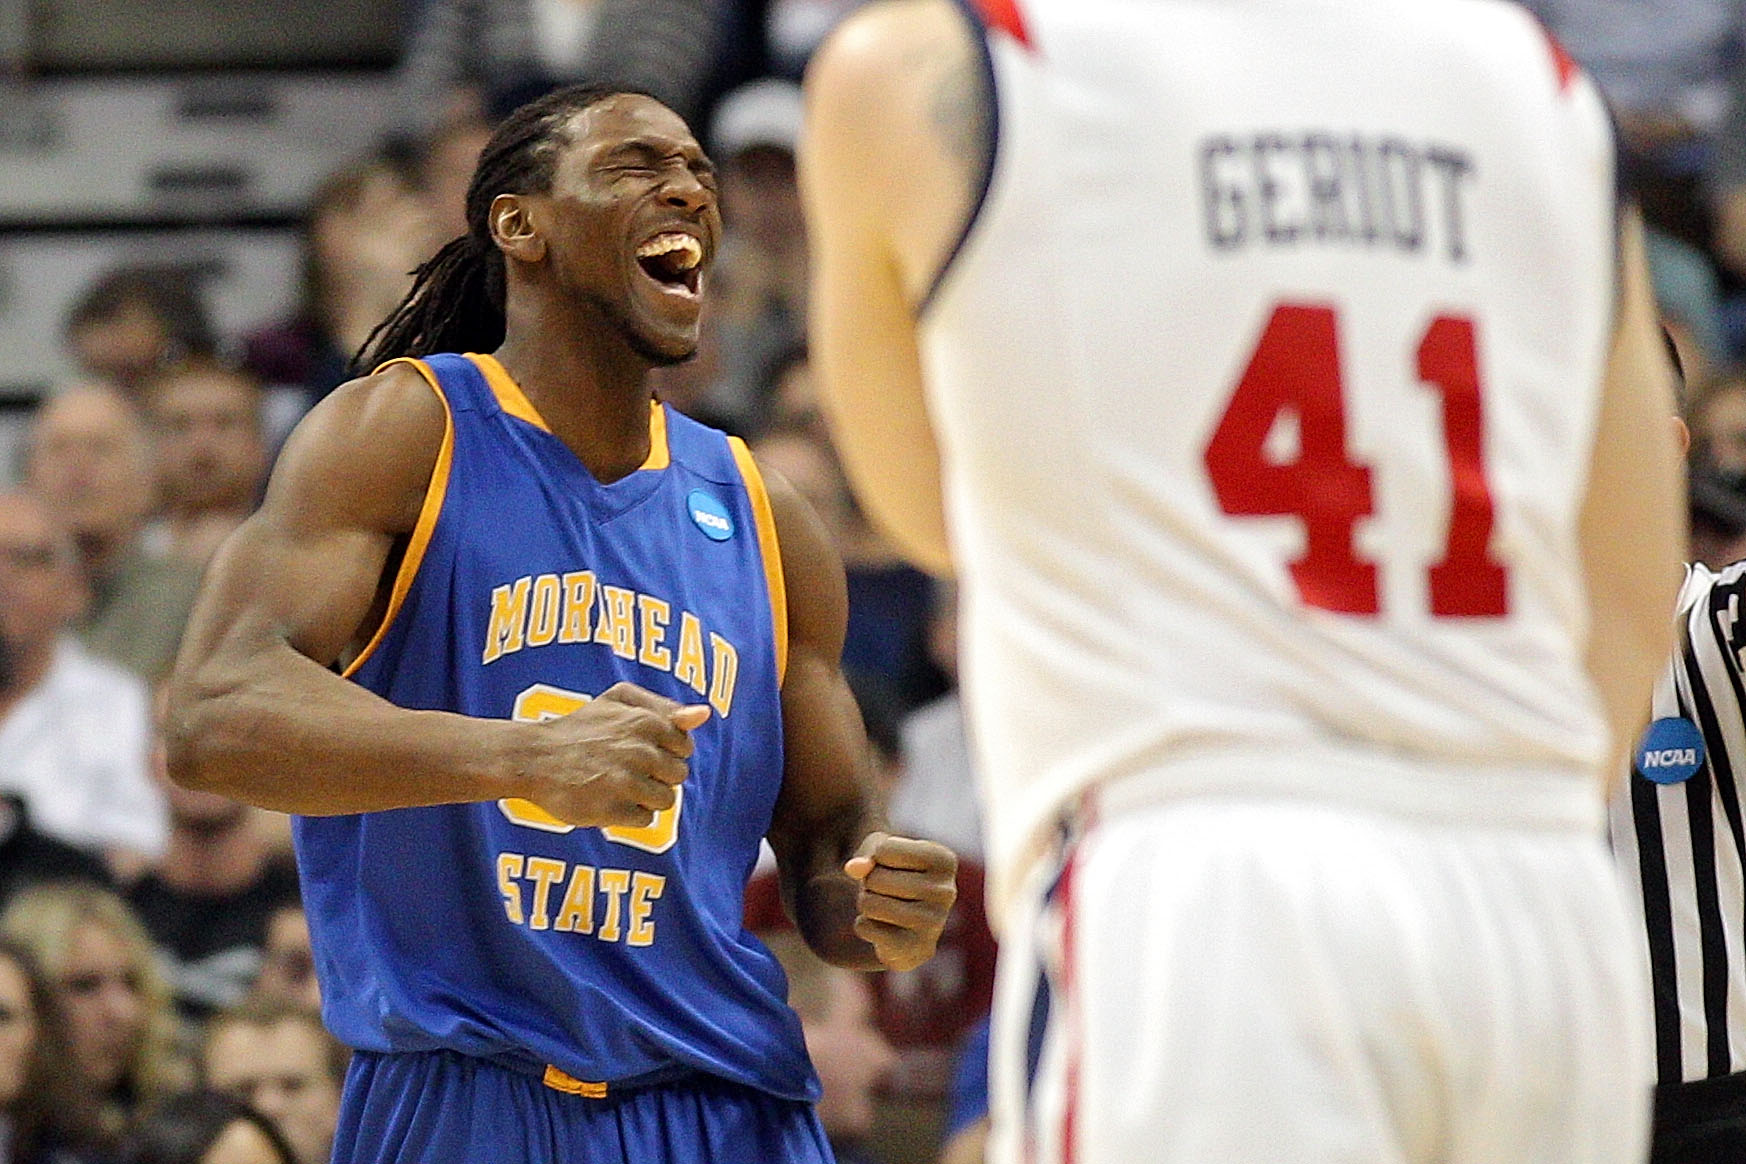 DENVER, CO - MARCH 19:  Kenneth Faried #35 of the Morehead State Eagles dunks reacts after a play against the Richmond Spiders during the third round of the 2011 NCAA men's basketball tournament at Pepsi Center on March 19, 2011 in Denver, Colorado.  (Pho